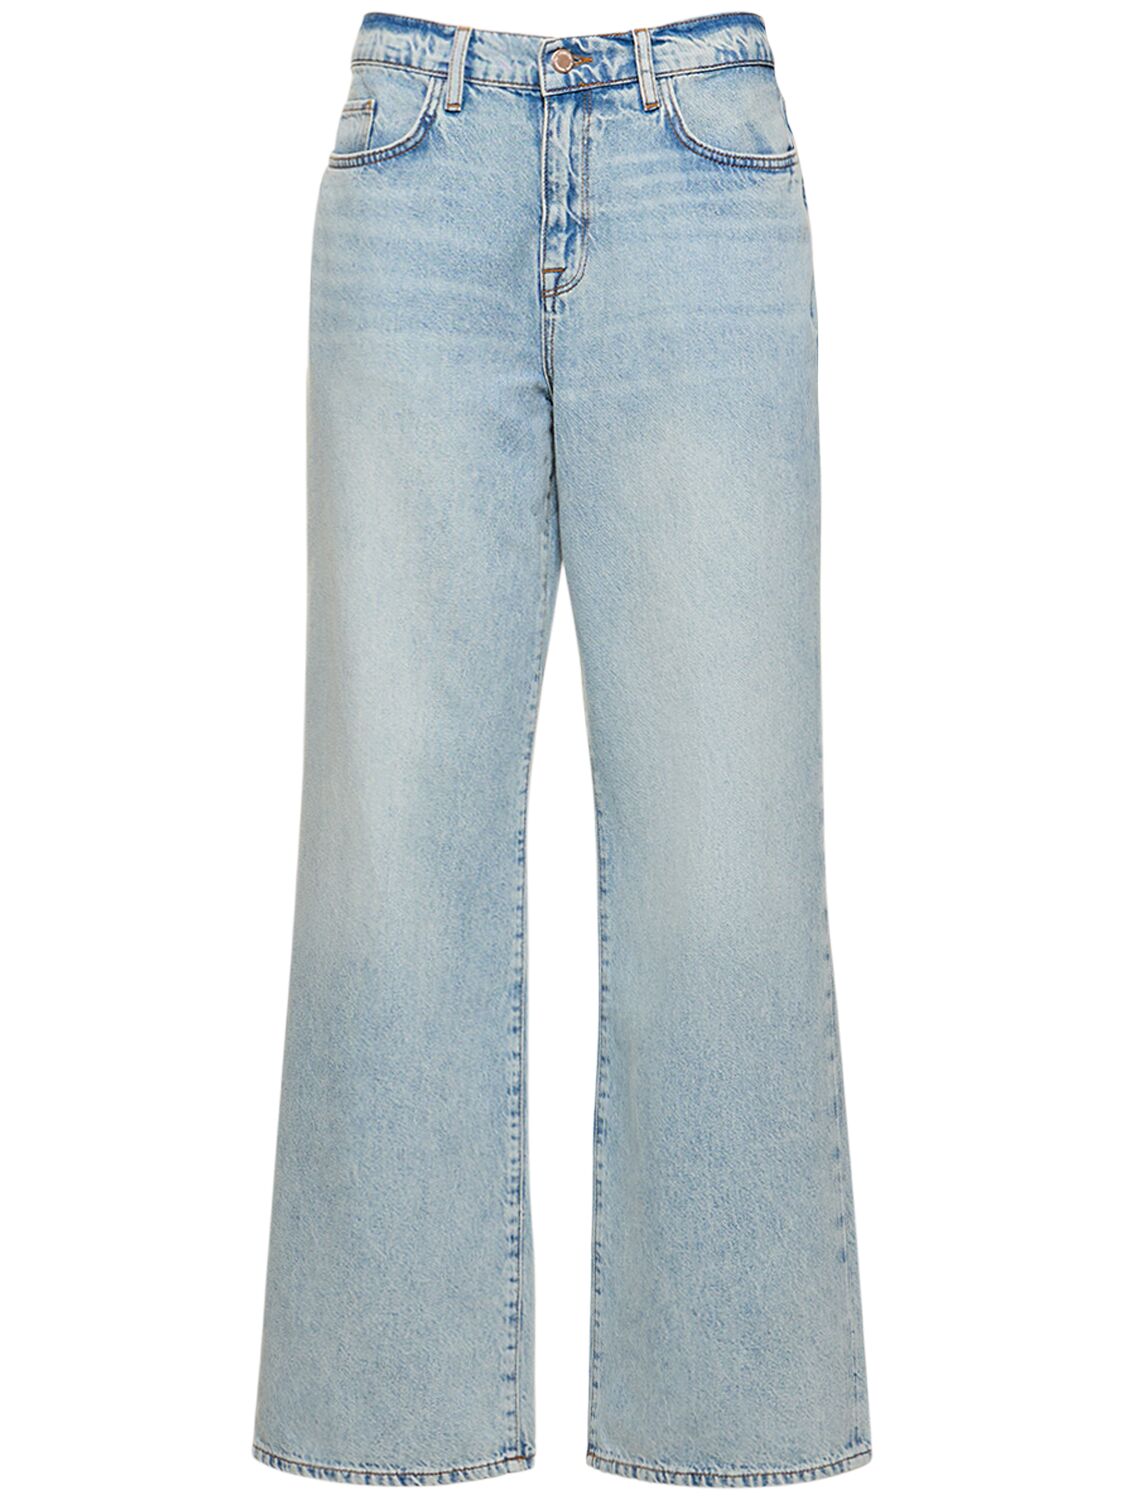 Triarchy Ms. Miley Mid-rise Baggy Cotton Jeans In Summer Light Indi